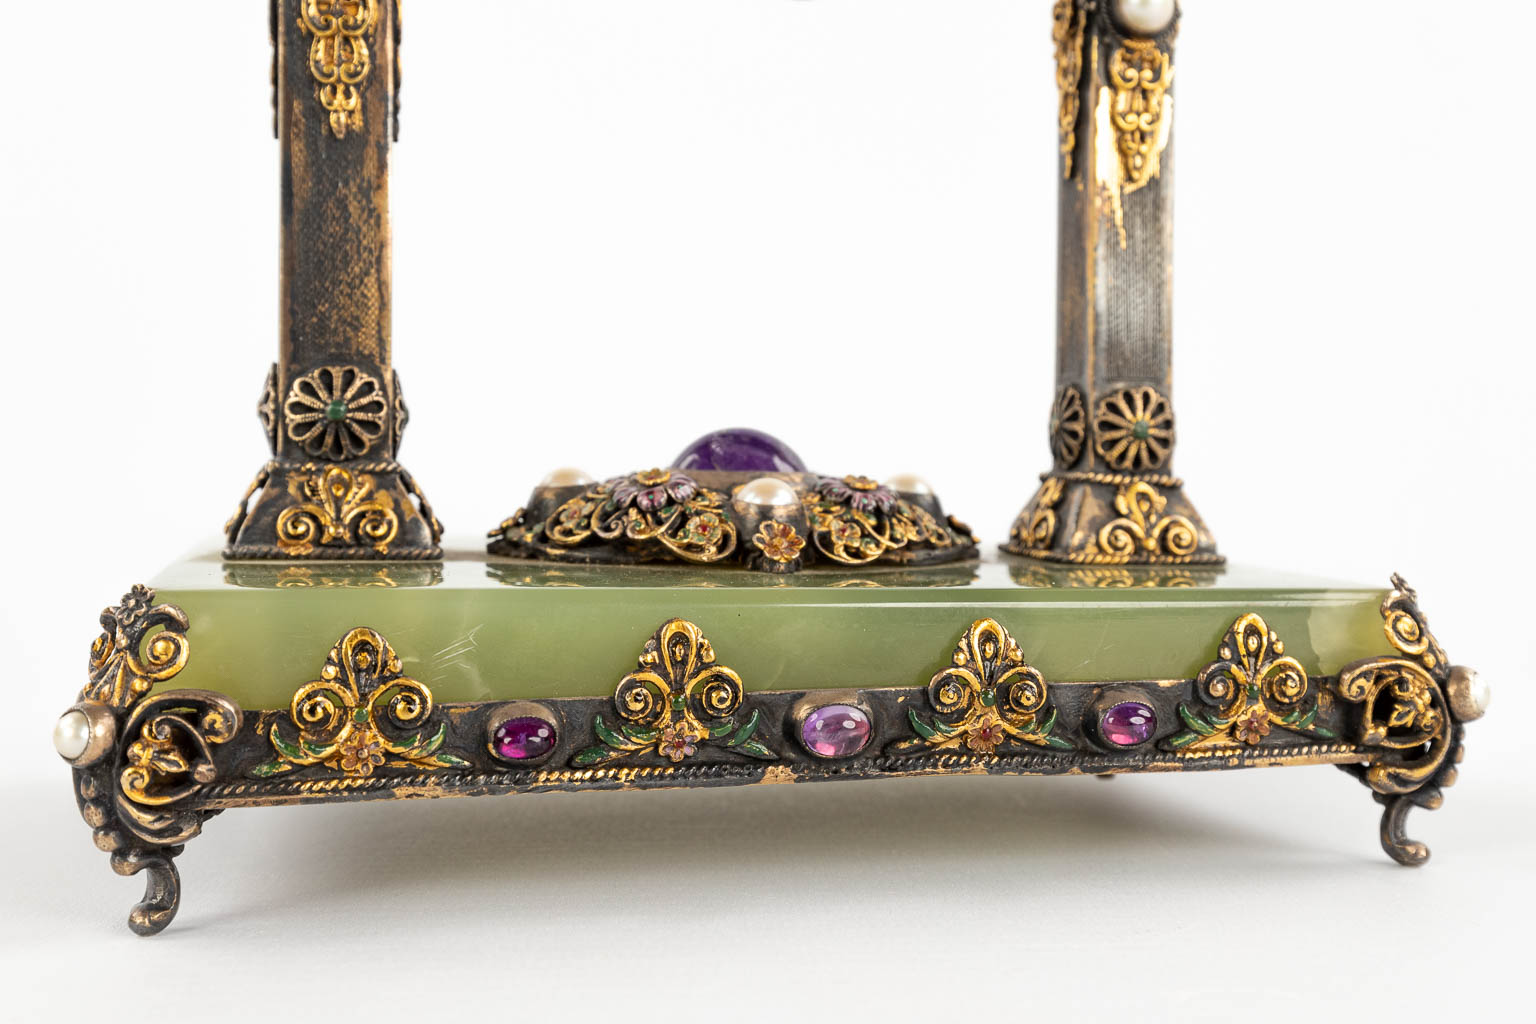 A mantle clock, silver and gold-plated metal and decorated with stone and onyx, pearls. Circa 1900. (D:10,5 x W:16 x H:25 cm)